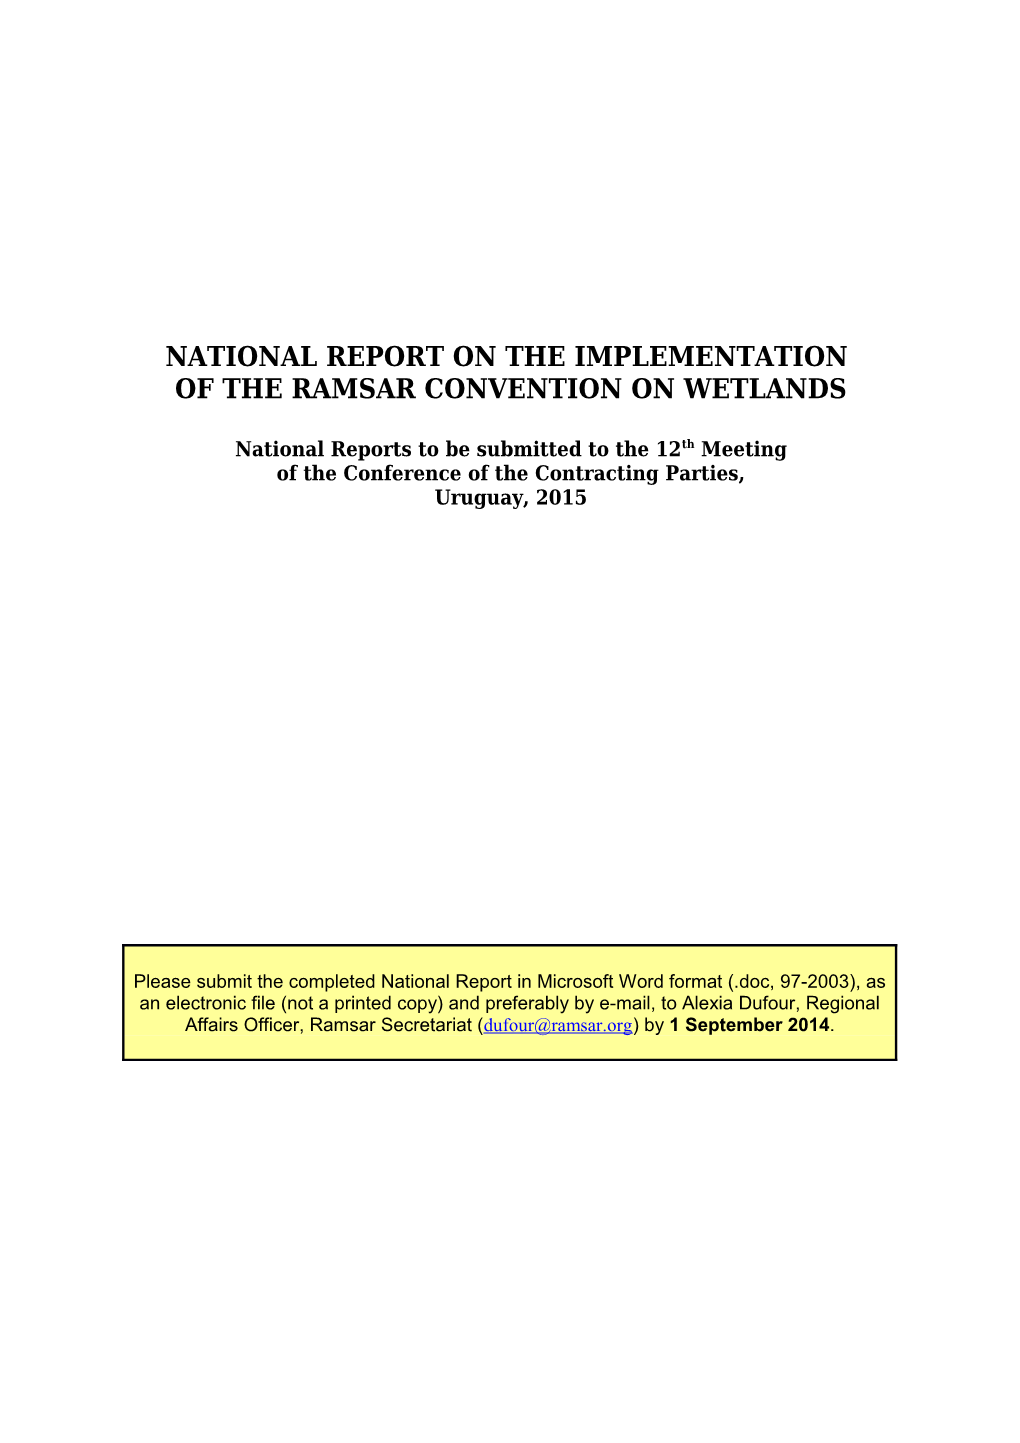 National Report Format for Ramsar COP12, Page 1